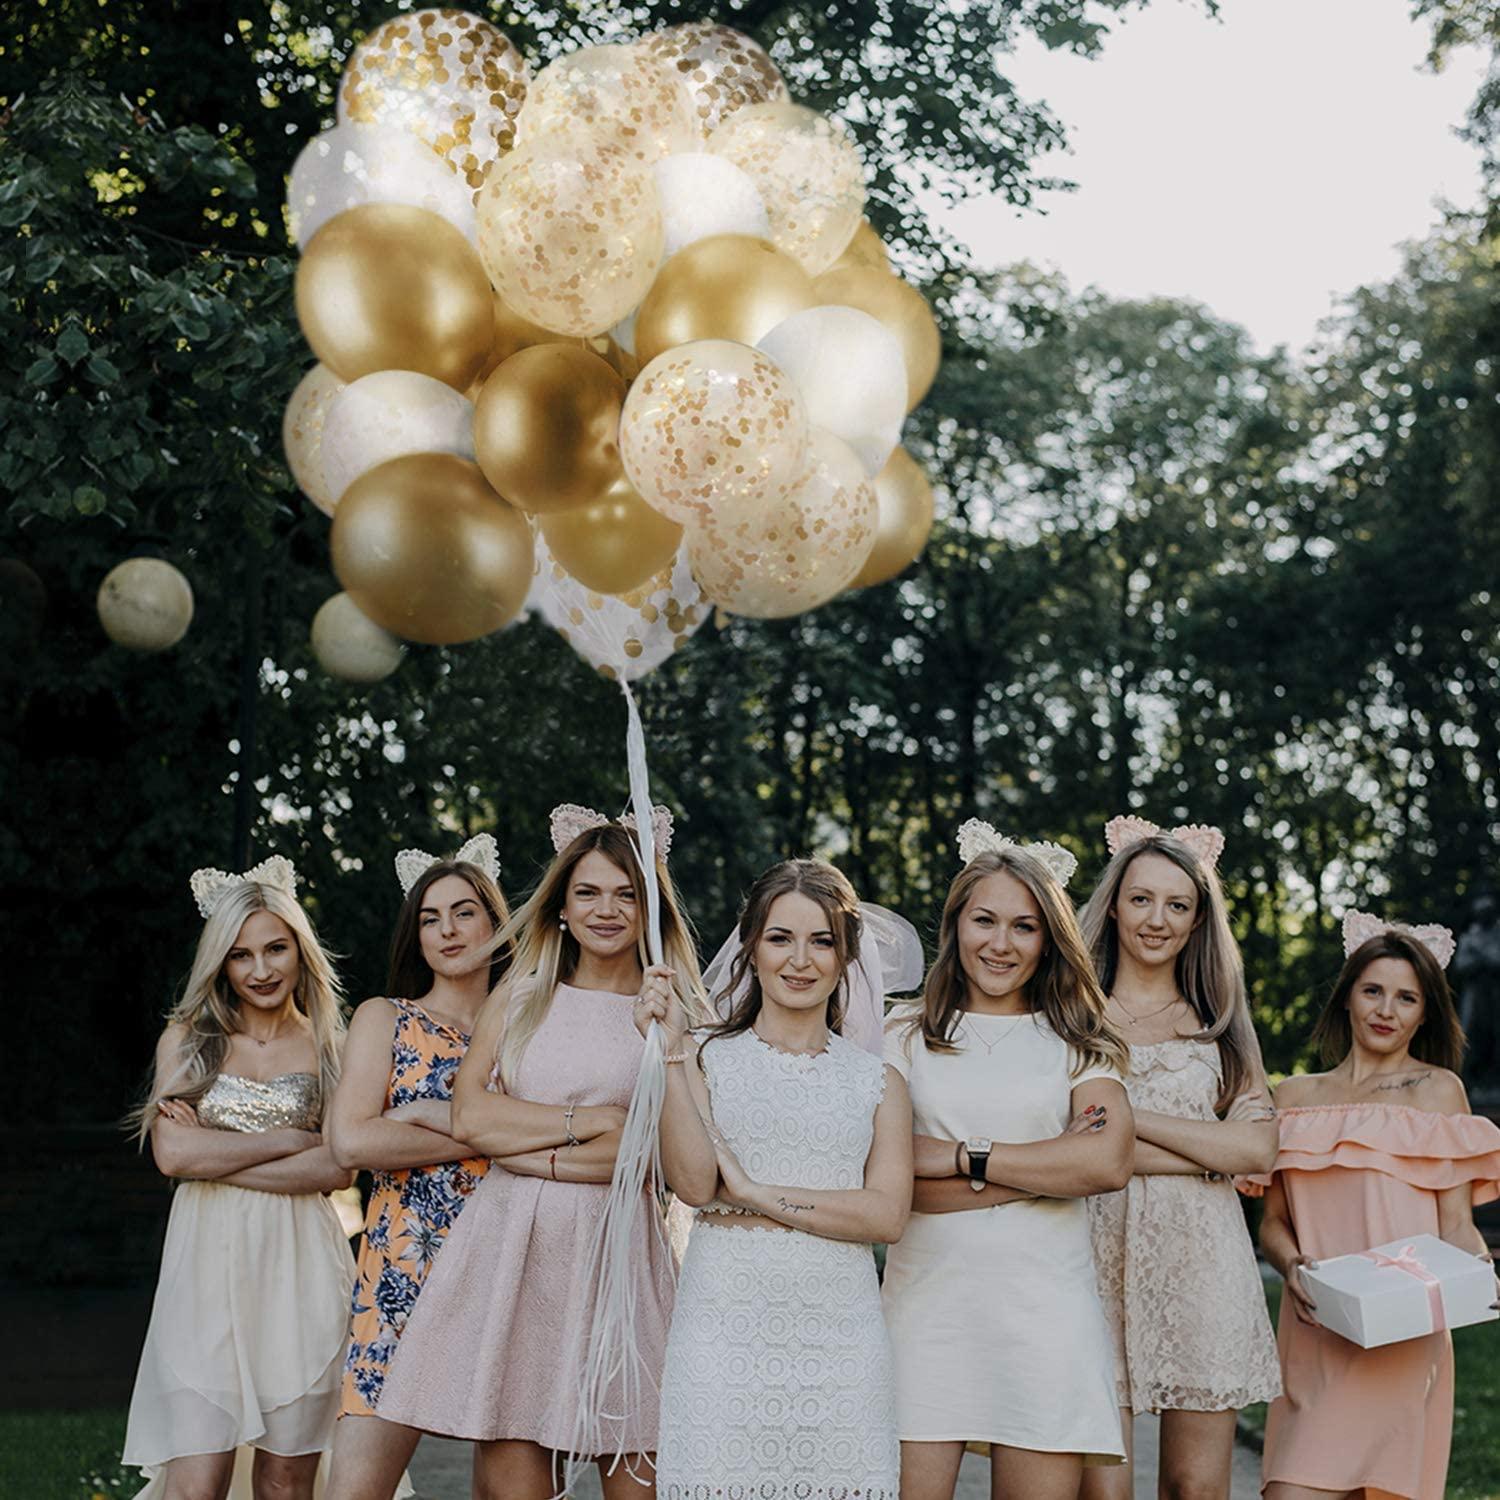 60pcs 12 Inches Latex Party Balloons, Gold Glitter Balloons, for Parties, Birthdays, Weddings, Decorations - If you say i do